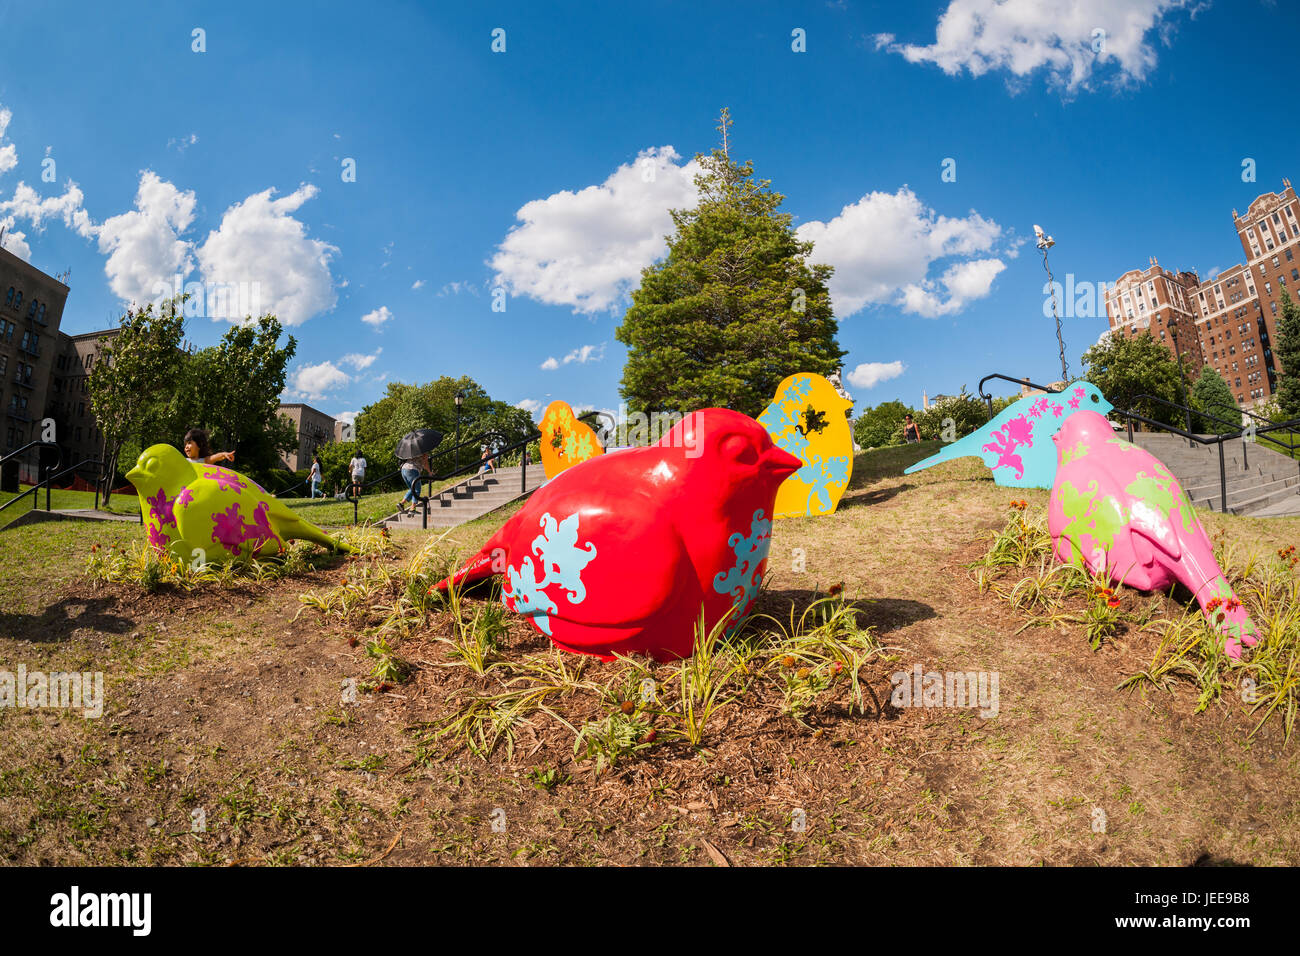 Visitors to Joyce Kilmer Park in the Bronx in New York on Tuesday, June 20, 2017 enjoy 'Flying High for Equality' by the artists Patricia Cazoria and Nancy Saleme. The oversized colorful sparrows represented by the artwork are meant to be a metaphor for the search for equality, channeling the urban sparrow's abilities of resistance, intelligence and beauty represented in New York's communities.  The sculpture is funded by the Art in the Parks: UNIQLO Park Expressions Grant.  (© Richard B. Levine) Stock Photo